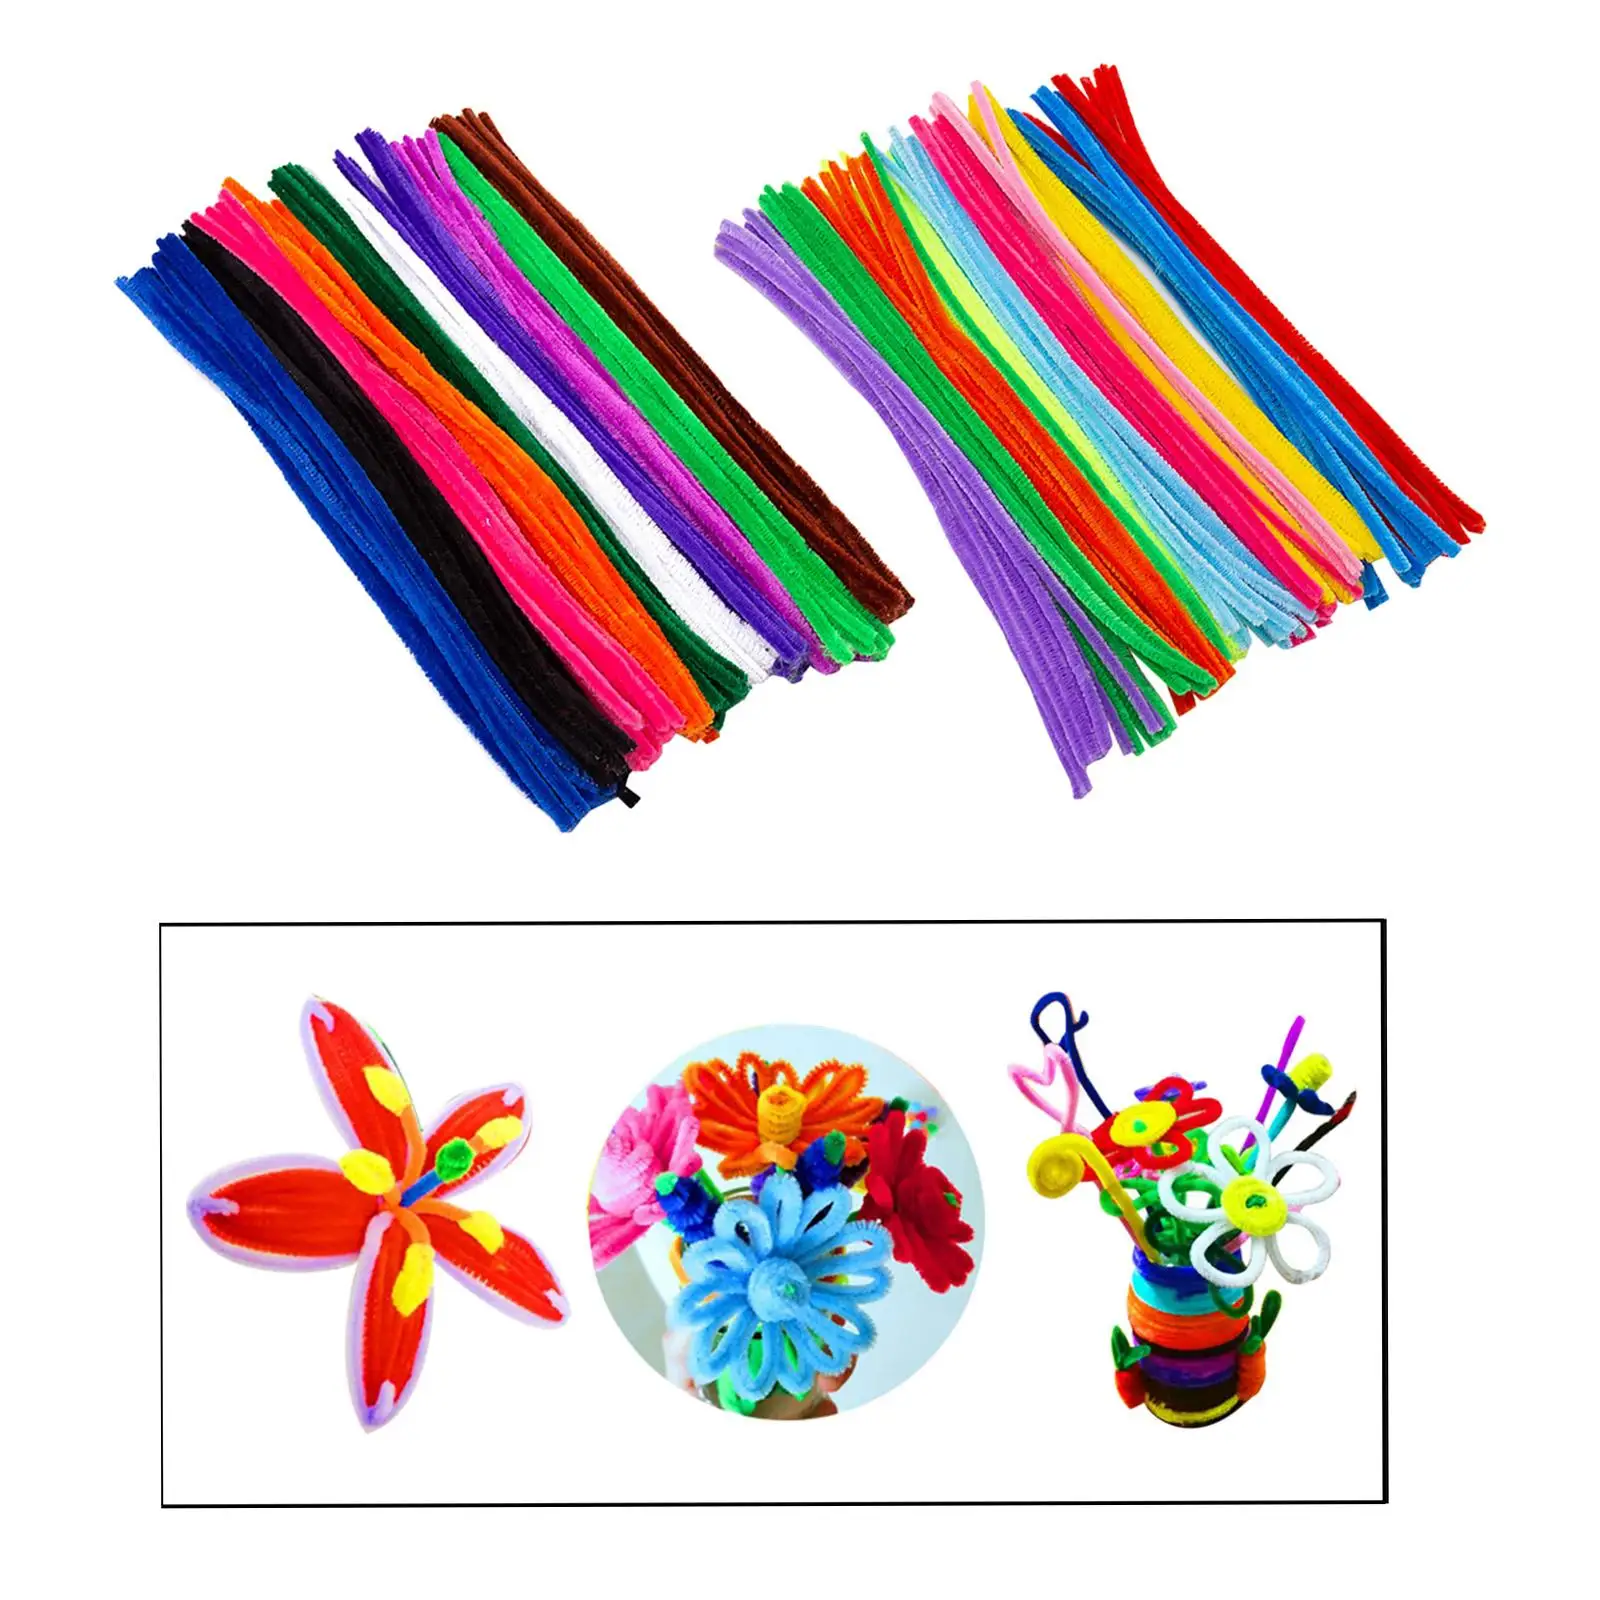 Twisting Bar Decoration DIY Project Crafting Materials Handmade Assorted Colored Gifts Art Crafts Supplies for Preschool Parties